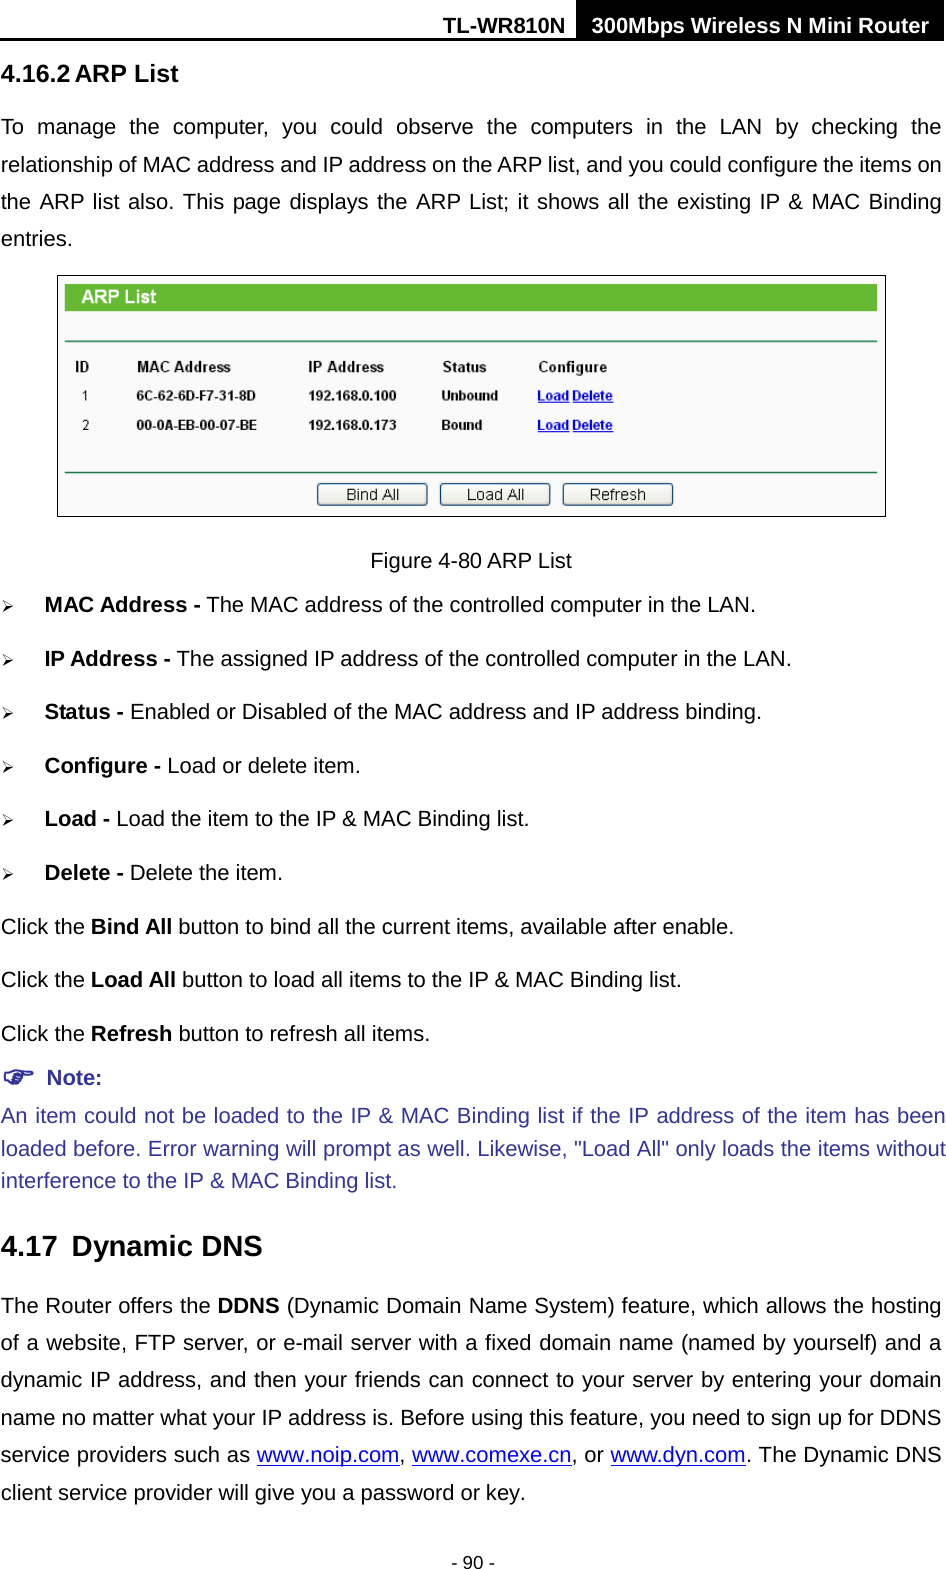 TL-WR810N 300Mbps Wireless N Mini Router  - 90 - 4.16.2 ARP List To manage the computer, you could observe the computers in the LAN by checking the relationship of MAC address and IP address on the ARP list, and you could configure the items on the ARP list also. This page displays the ARP List; it shows all the existing IP &amp; MAC Binding entries.  Figure 4-80 ARP List  MAC Address - The MAC address of the controlled computer in the LAN.  IP Address - The assigned IP address of the controlled computer in the LAN.  Status - Enabled or Disabled of the MAC address and IP address binding.  Configure - Load or delete item.  Load - Load the item to the IP &amp; MAC Binding list.  Delete - Delete the item. Click the Bind All button to bind all the current items, available after enable. Click the Load All button to load all items to the IP &amp; MAC Binding list. Click the Refresh button to refresh all items.  Note: An item could not be loaded to the IP &amp; MAC Binding list if the IP address of the item has been loaded before. Error warning will prompt as well. Likewise, &quot;Load All&quot; only loads the items without interference to the IP &amp; MAC Binding list. 4.17 Dynamic DNS The Router offers the DDNS (Dynamic Domain Name System) feature, which allows the hosting of a website, FTP server, or e-mail server with a fixed domain name (named by yourself) and a dynamic IP address, and then your friends can connect to your server by entering your domain name no matter what your IP address is. Before using this feature, you need to sign up for DDNS service providers such as www.noip.com, www.comexe.cn, or www.dyn.com. The Dynamic DNS client service provider will give you a password or key. 